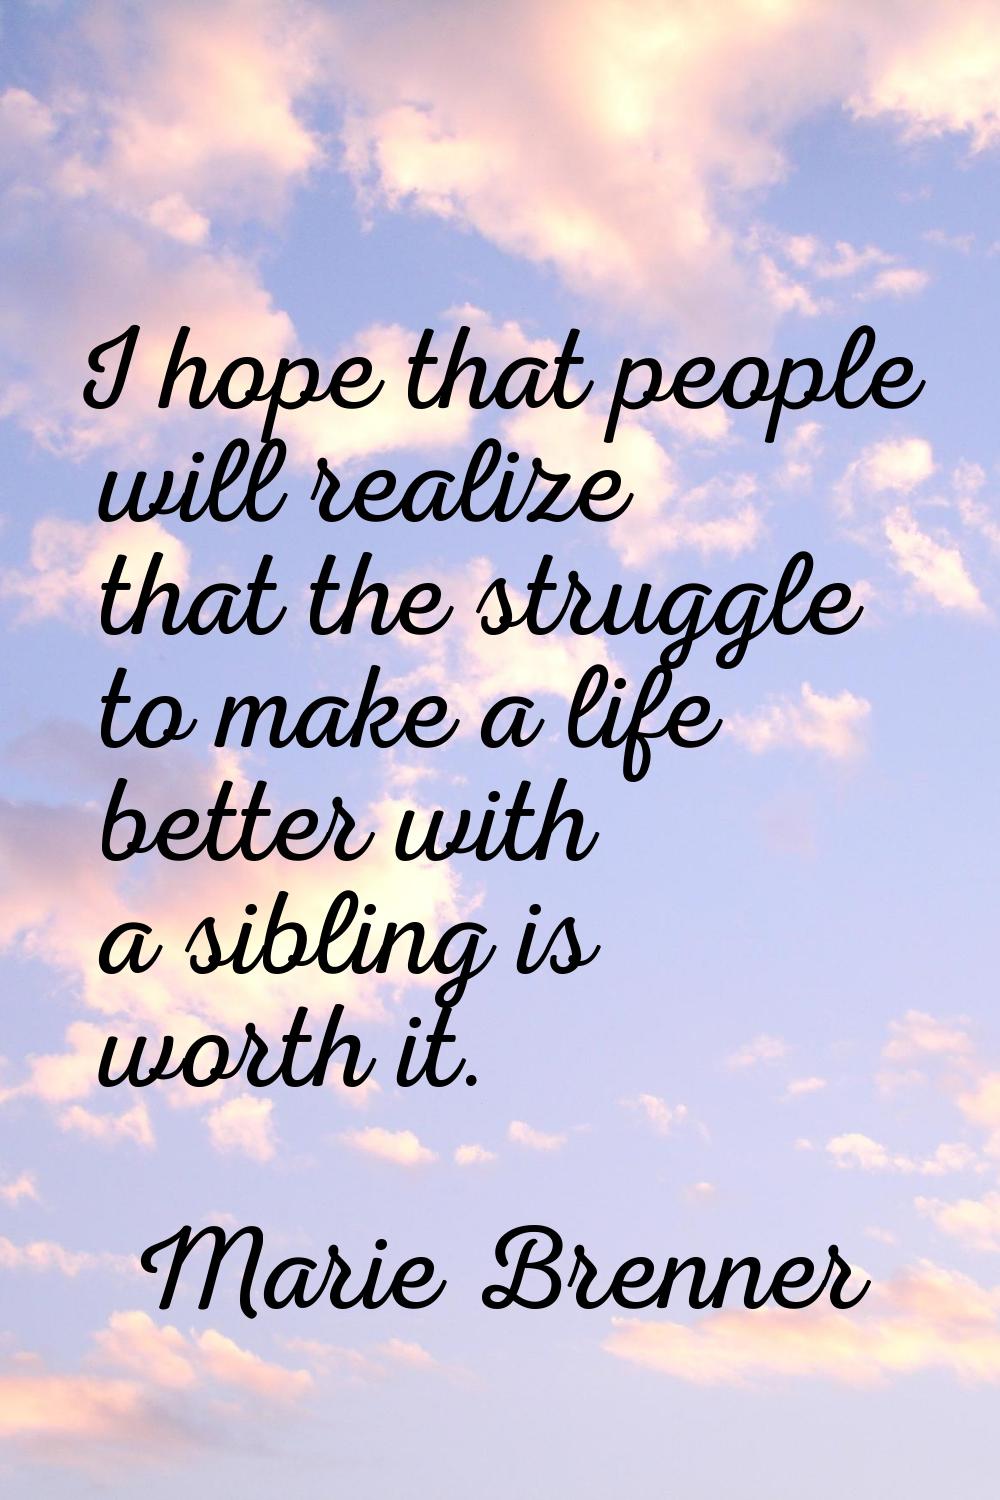 I hope that people will realize that the struggle to make a life better with a sibling is worth it.